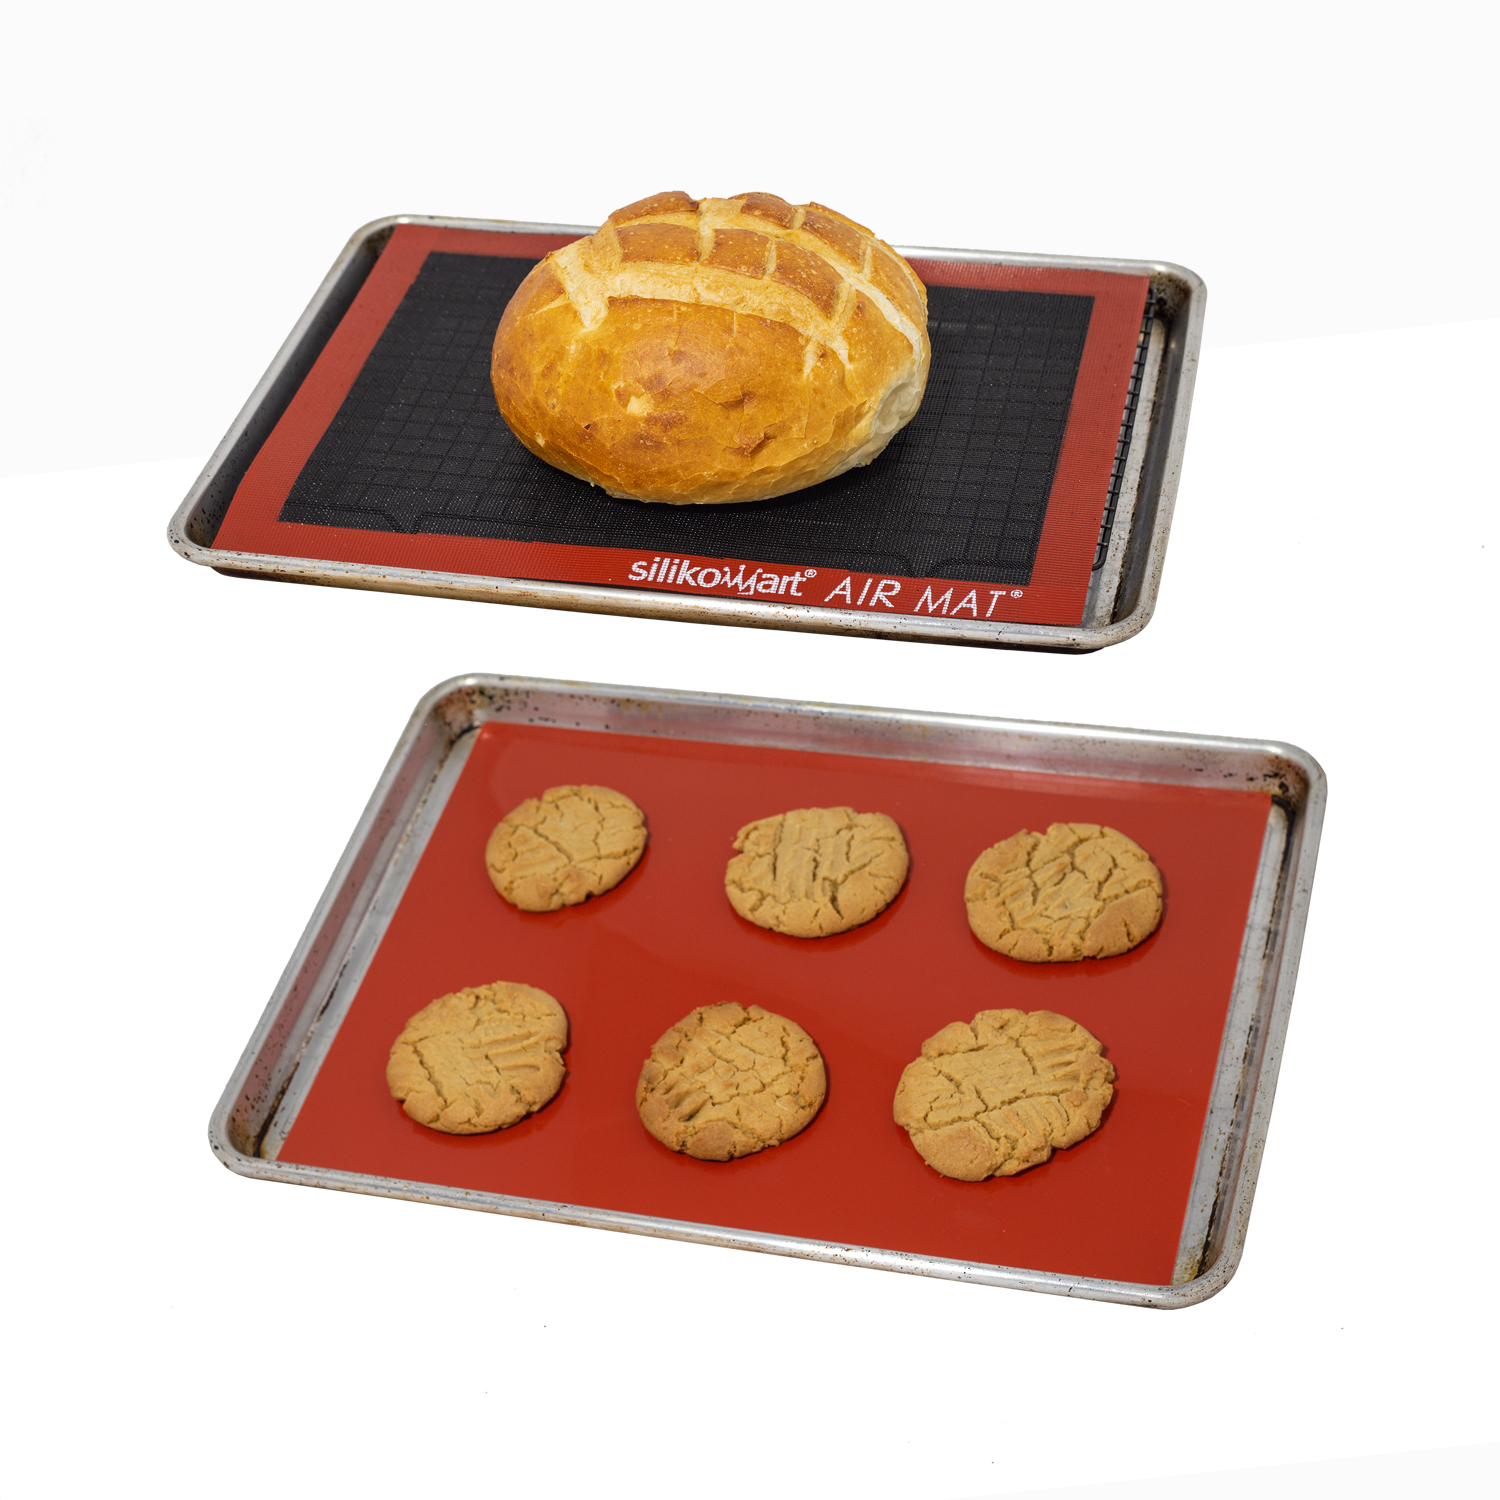 2 Large for Half Sheet Liners 16.54 L x 11. 6 W inch BPA Free FusionTech Silicone Mats for Baking Set of 3 Non Stick Silicone Baking Mat and 1 Quarter Heat Resistant Cookie Sheet 